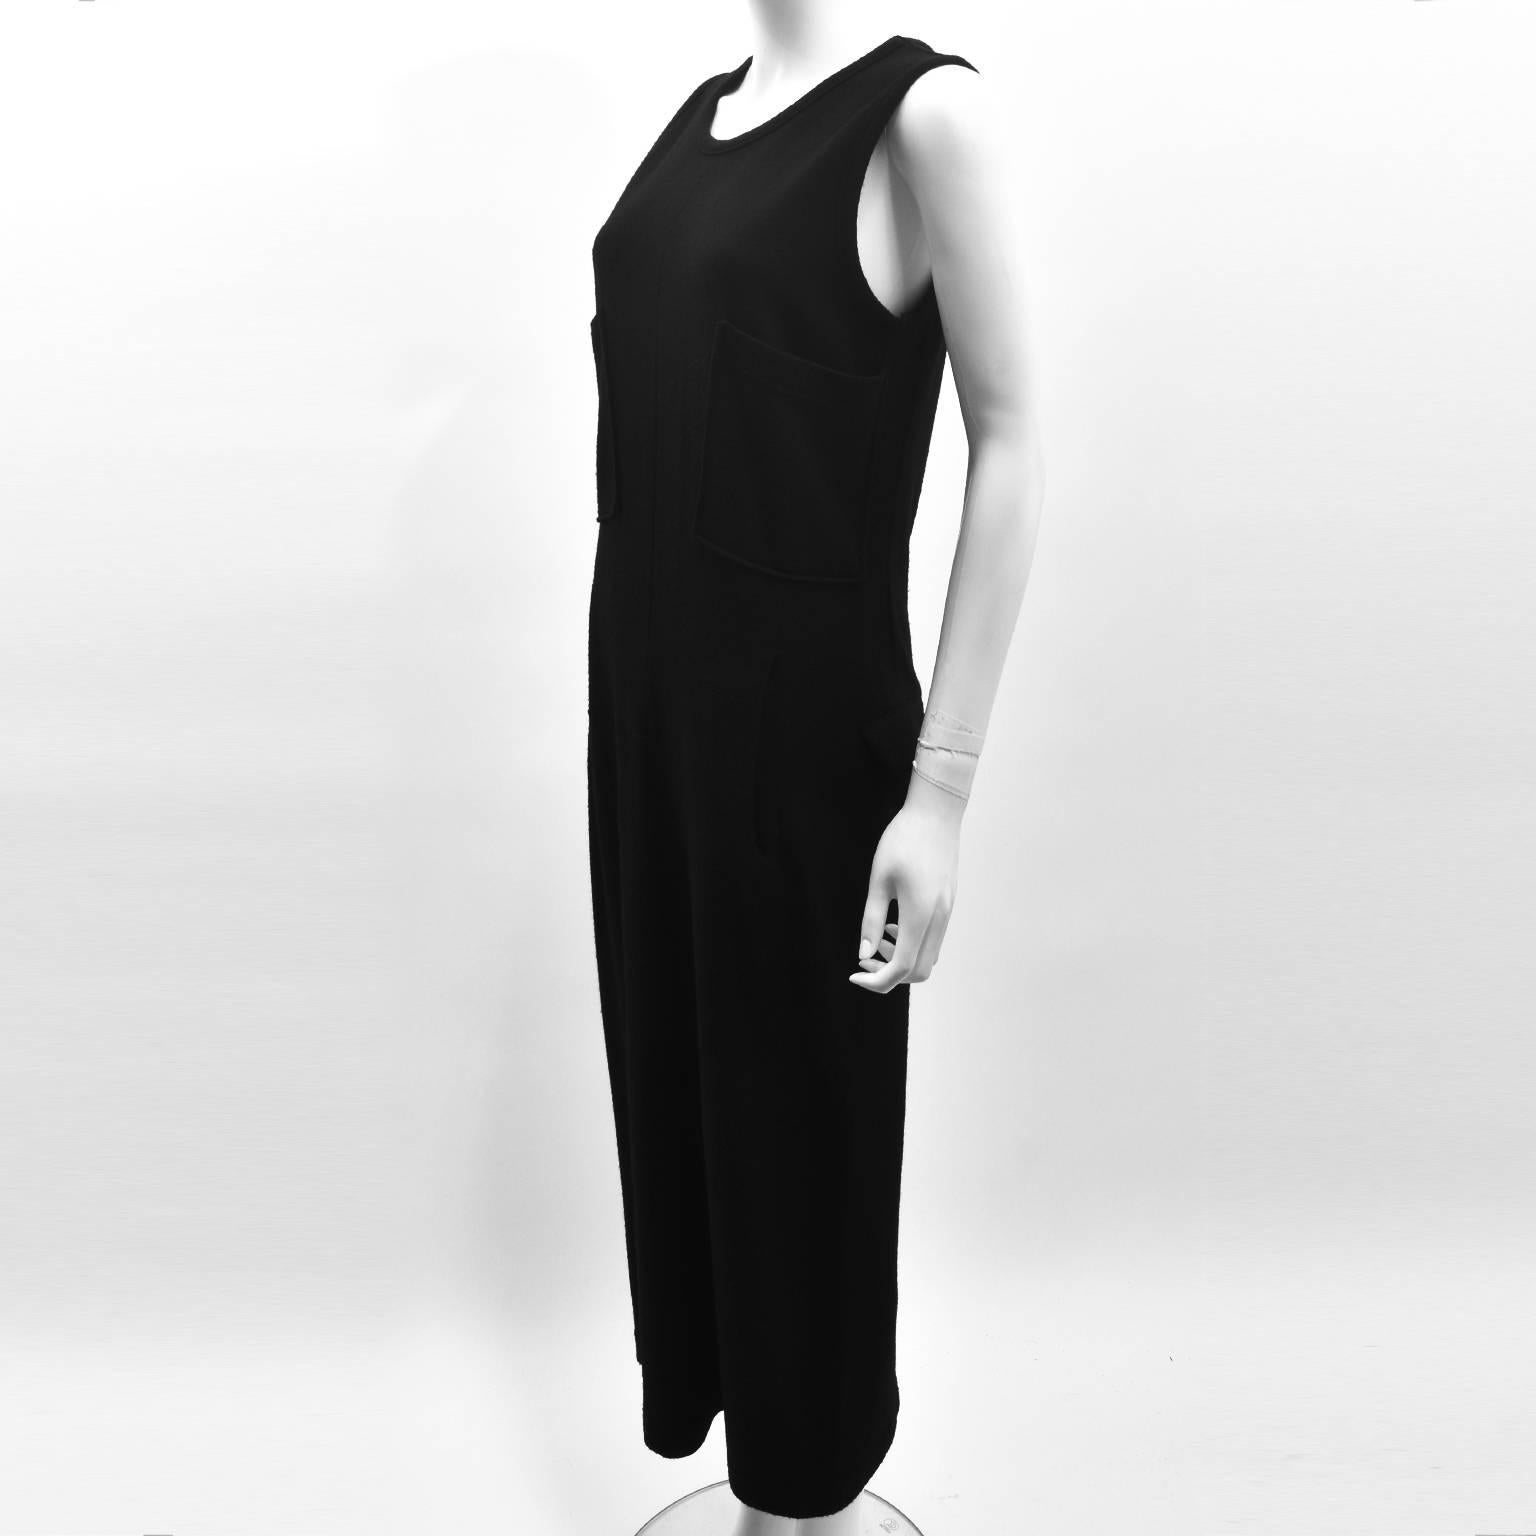 A stunning and versatile long black sleeveless dress from Y’s by Yohji Yamamoto. The dress has a simple, sheath shape with round neckline and sleeveless cut. It also features four pockets, adding a utilitarian and modern twist to a simple design.